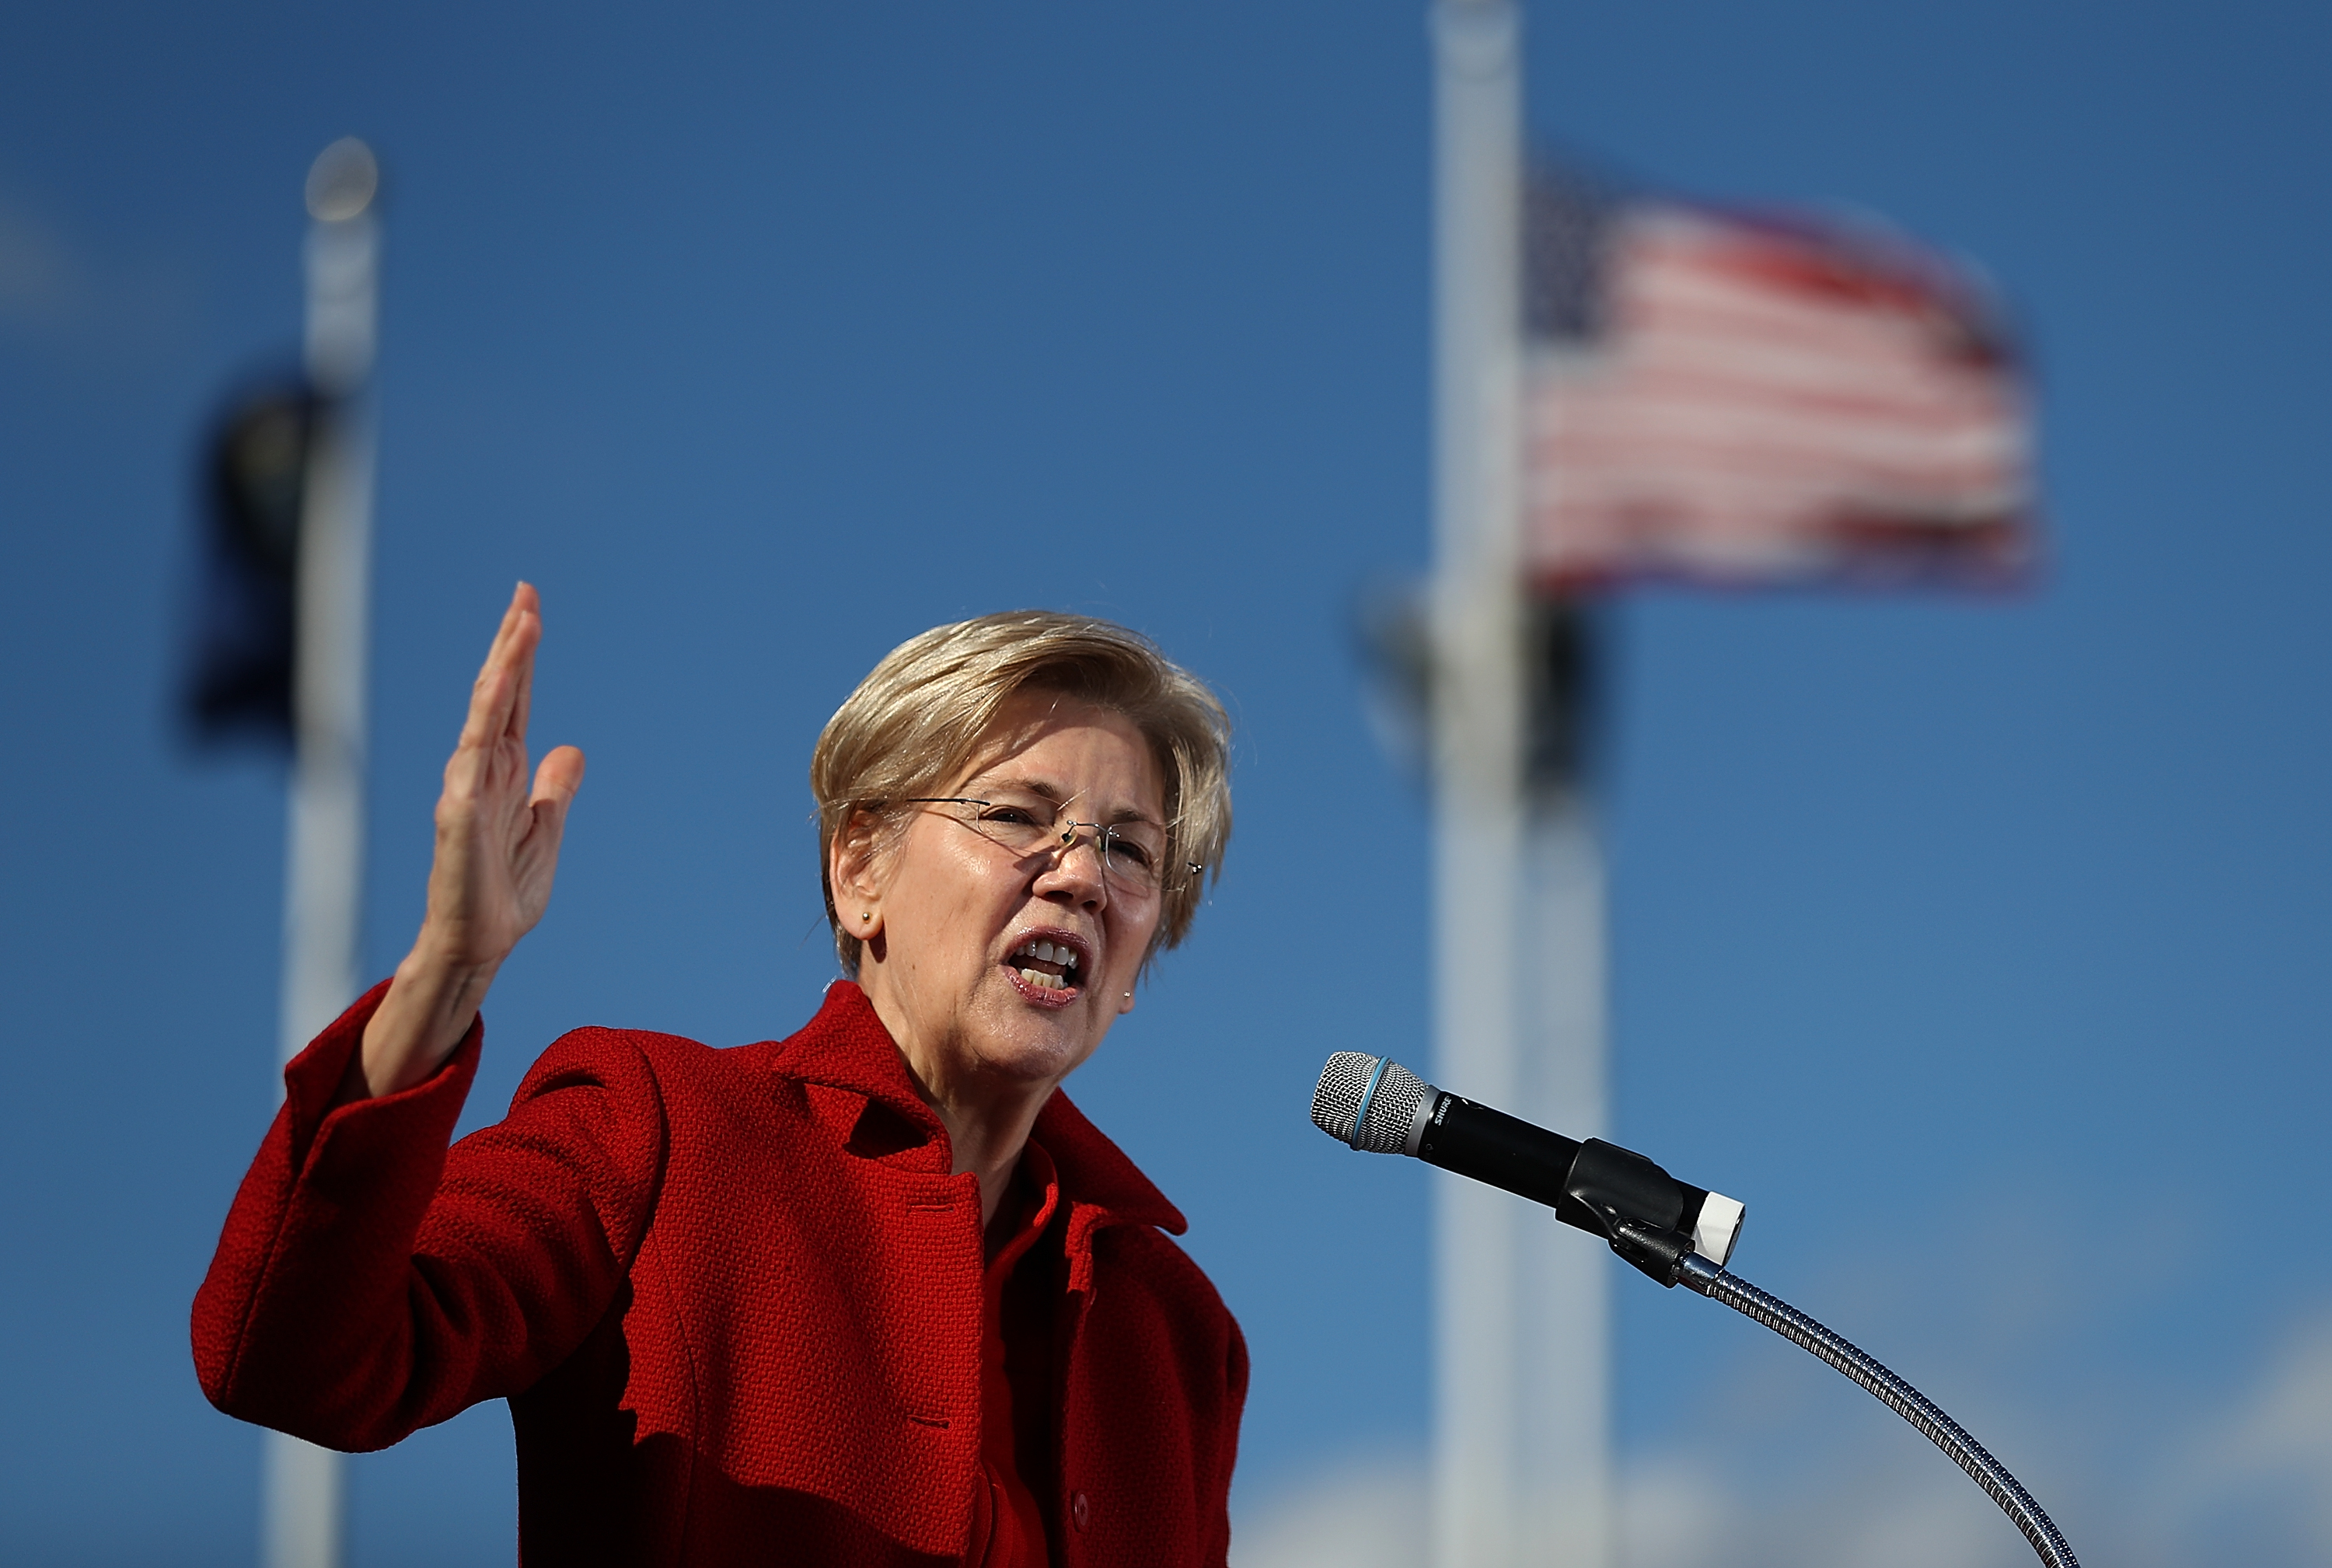 Sen. Elizabeth Warren speaks during a campaign rally with democratic presidential nominee former Secretary of State Hillary Clinton at St Saint Anselm College on Oct. 24, 2016 in Manchester, New Hampshire. (Justin Sullivan—Getty Images)